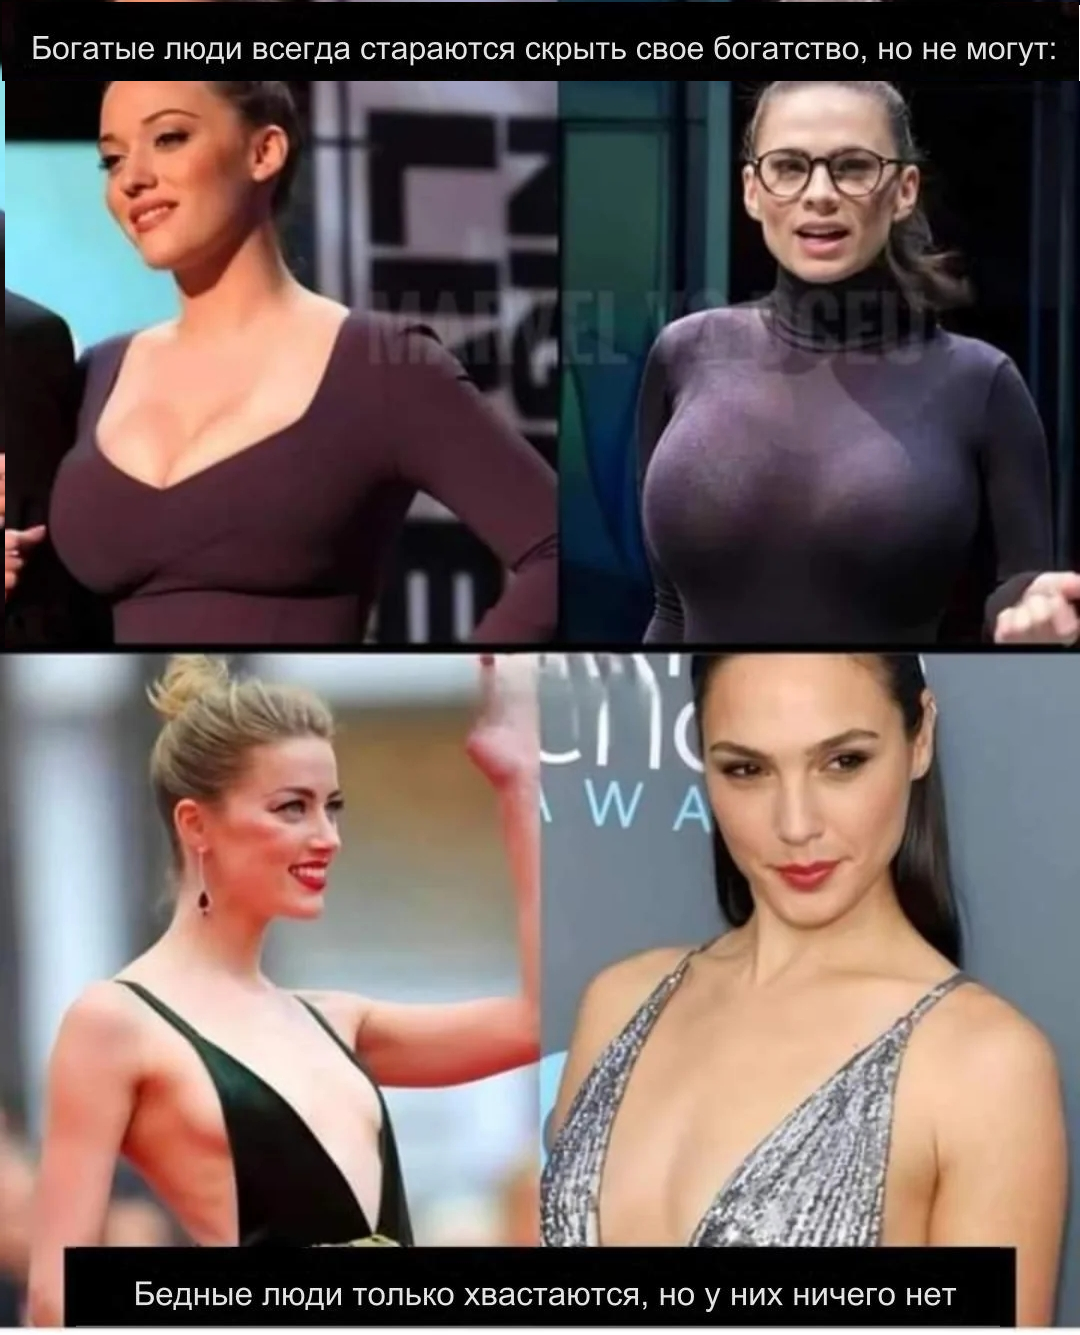 I noticed that - Picture with text, Memes, Humor, Neckline, Boobs